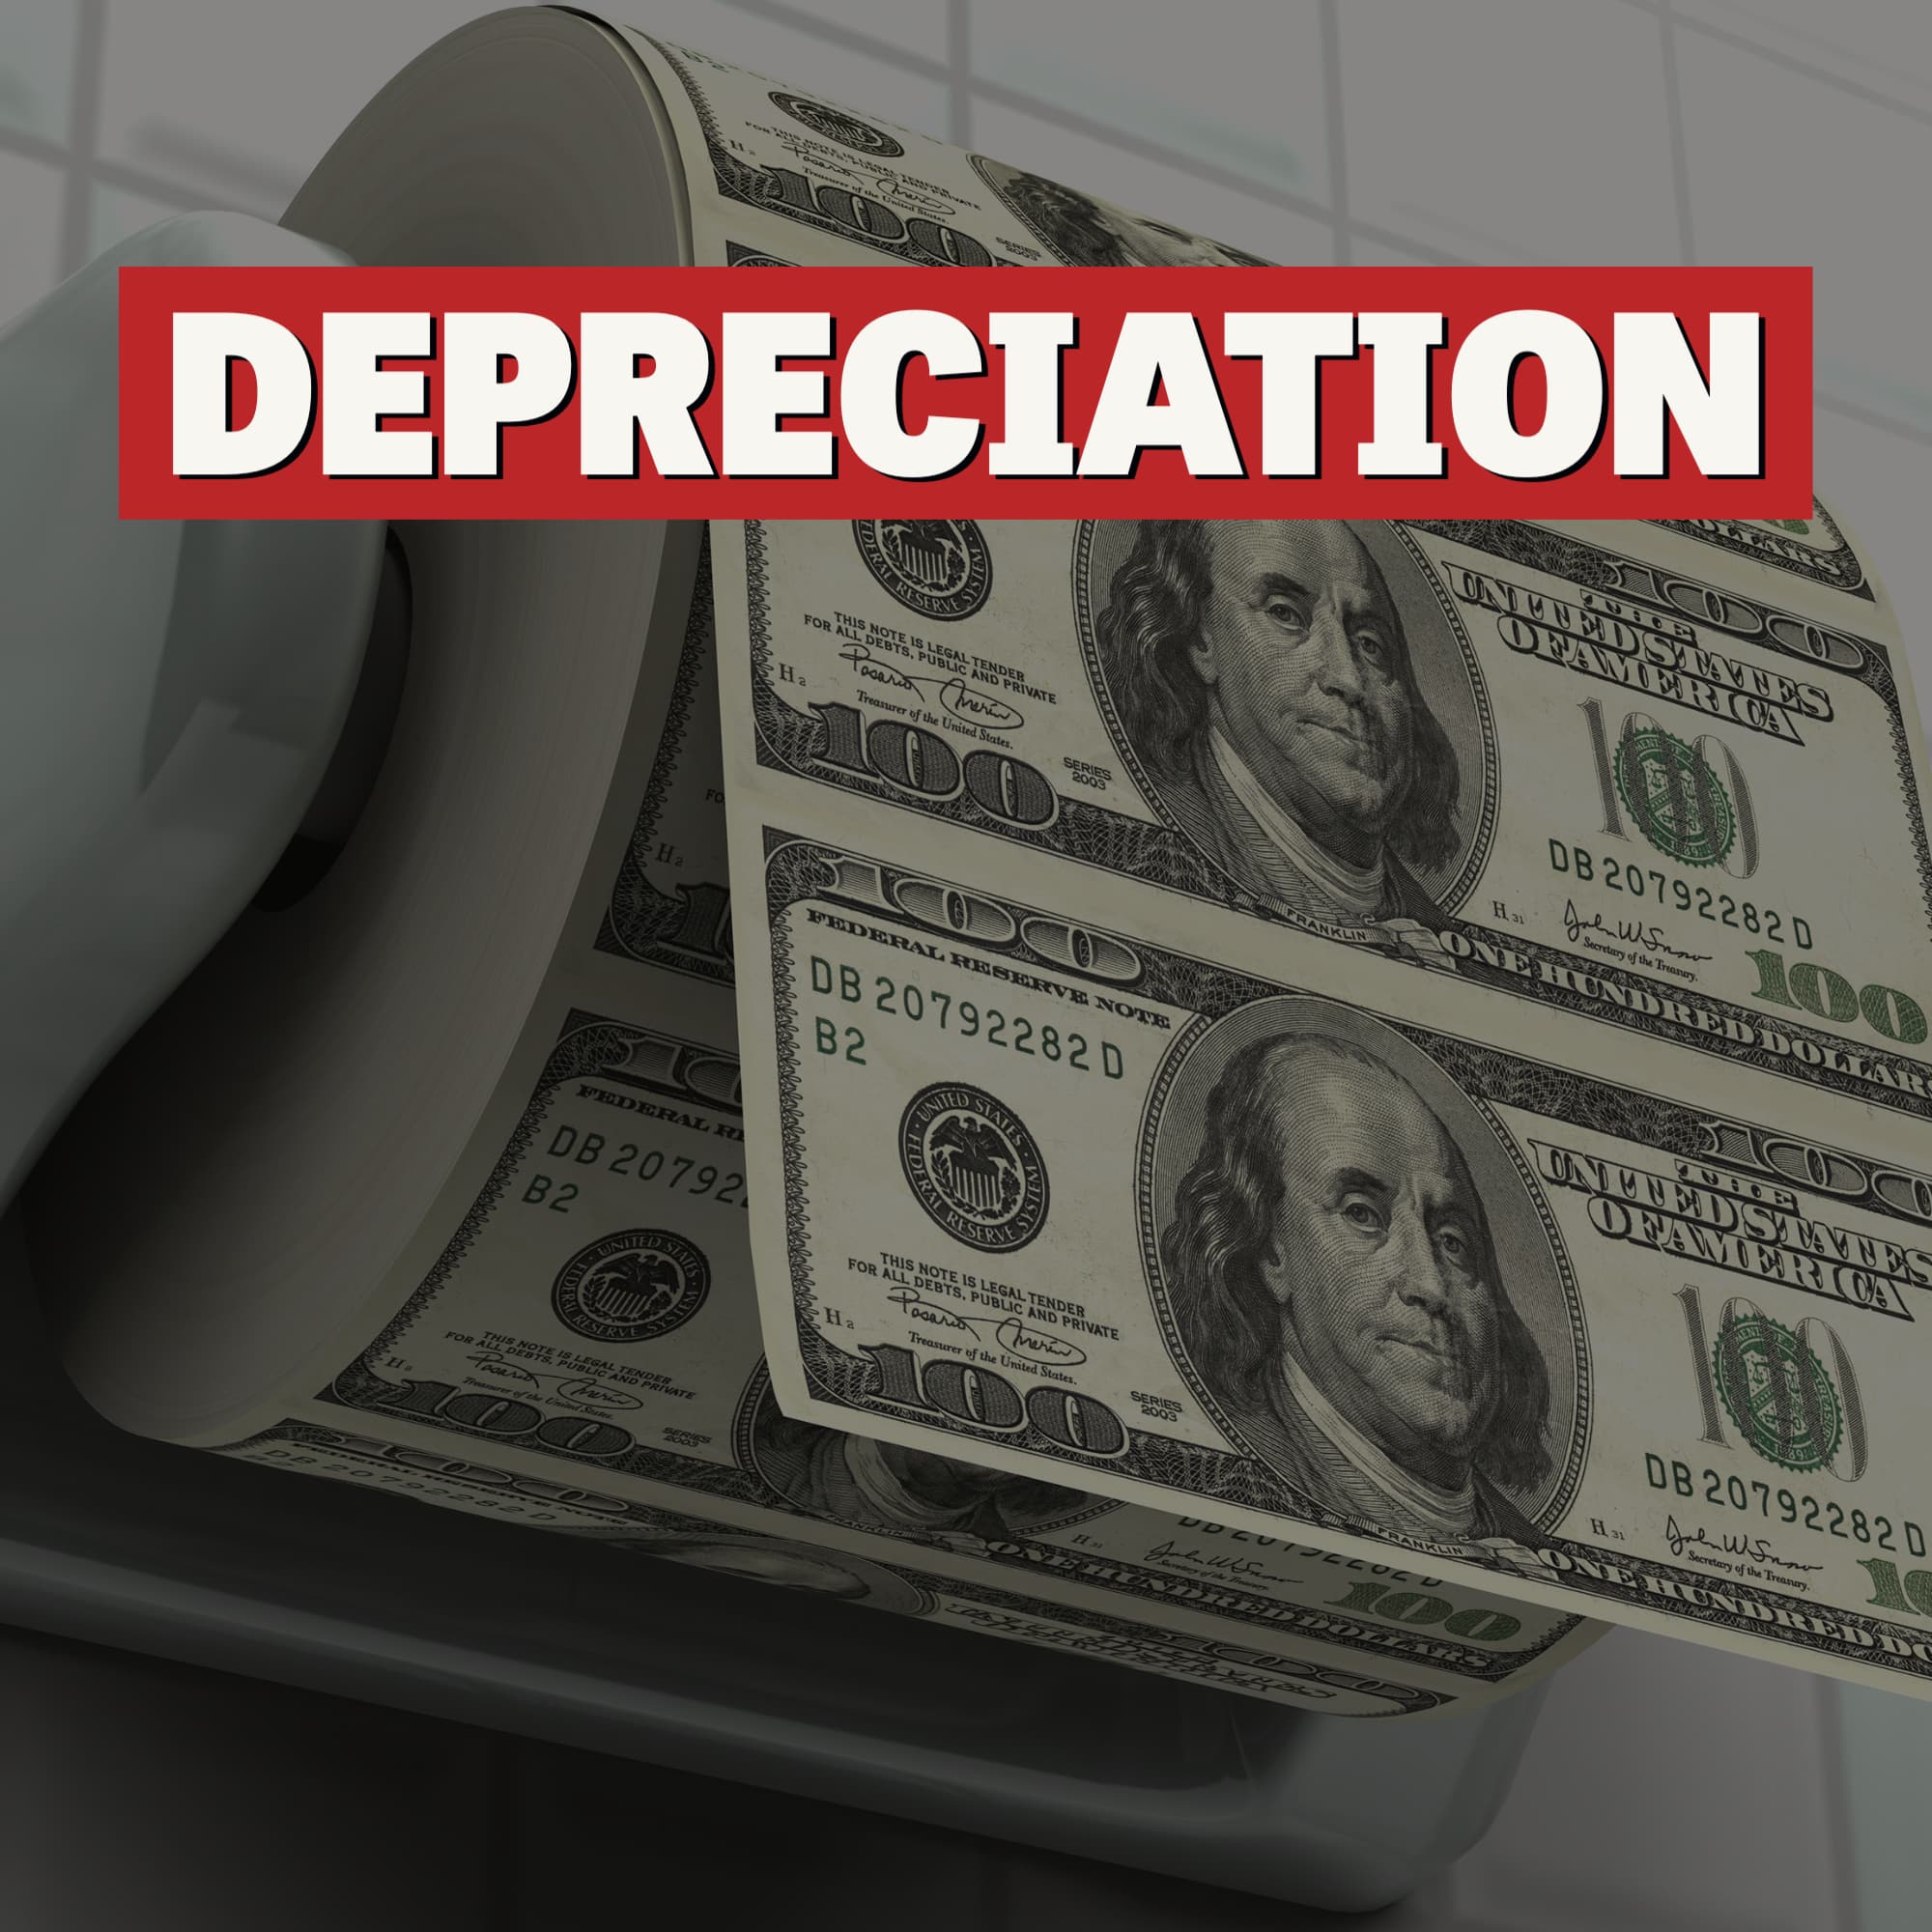 It’s not Inflation. It’s Depreciation.